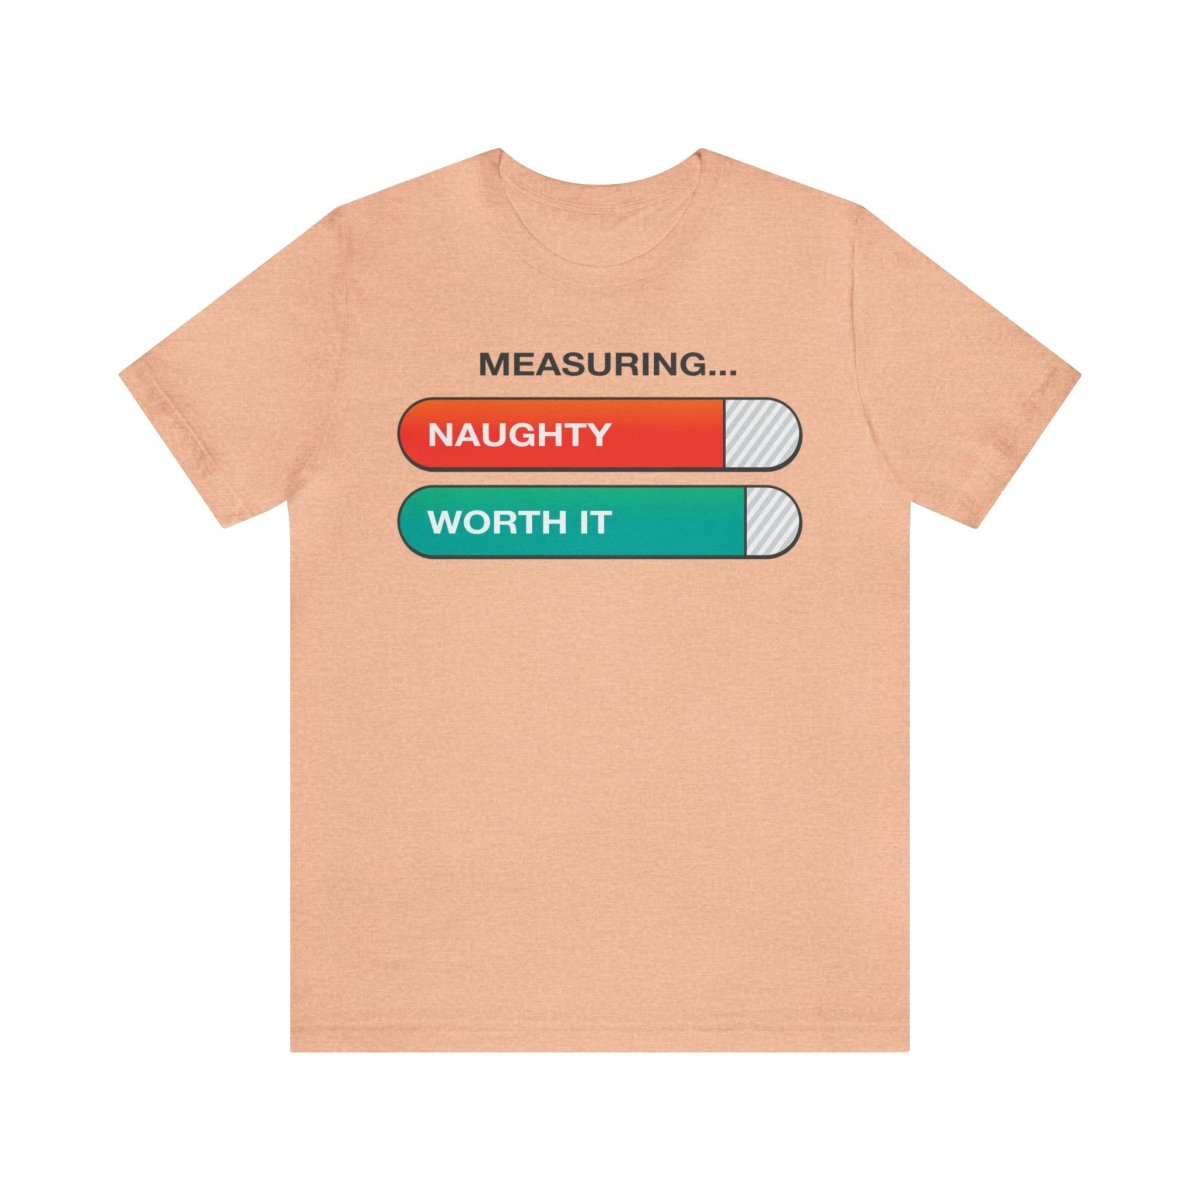 Christmas Funny Premium T-Shirt, Naughty Measure and Worth It